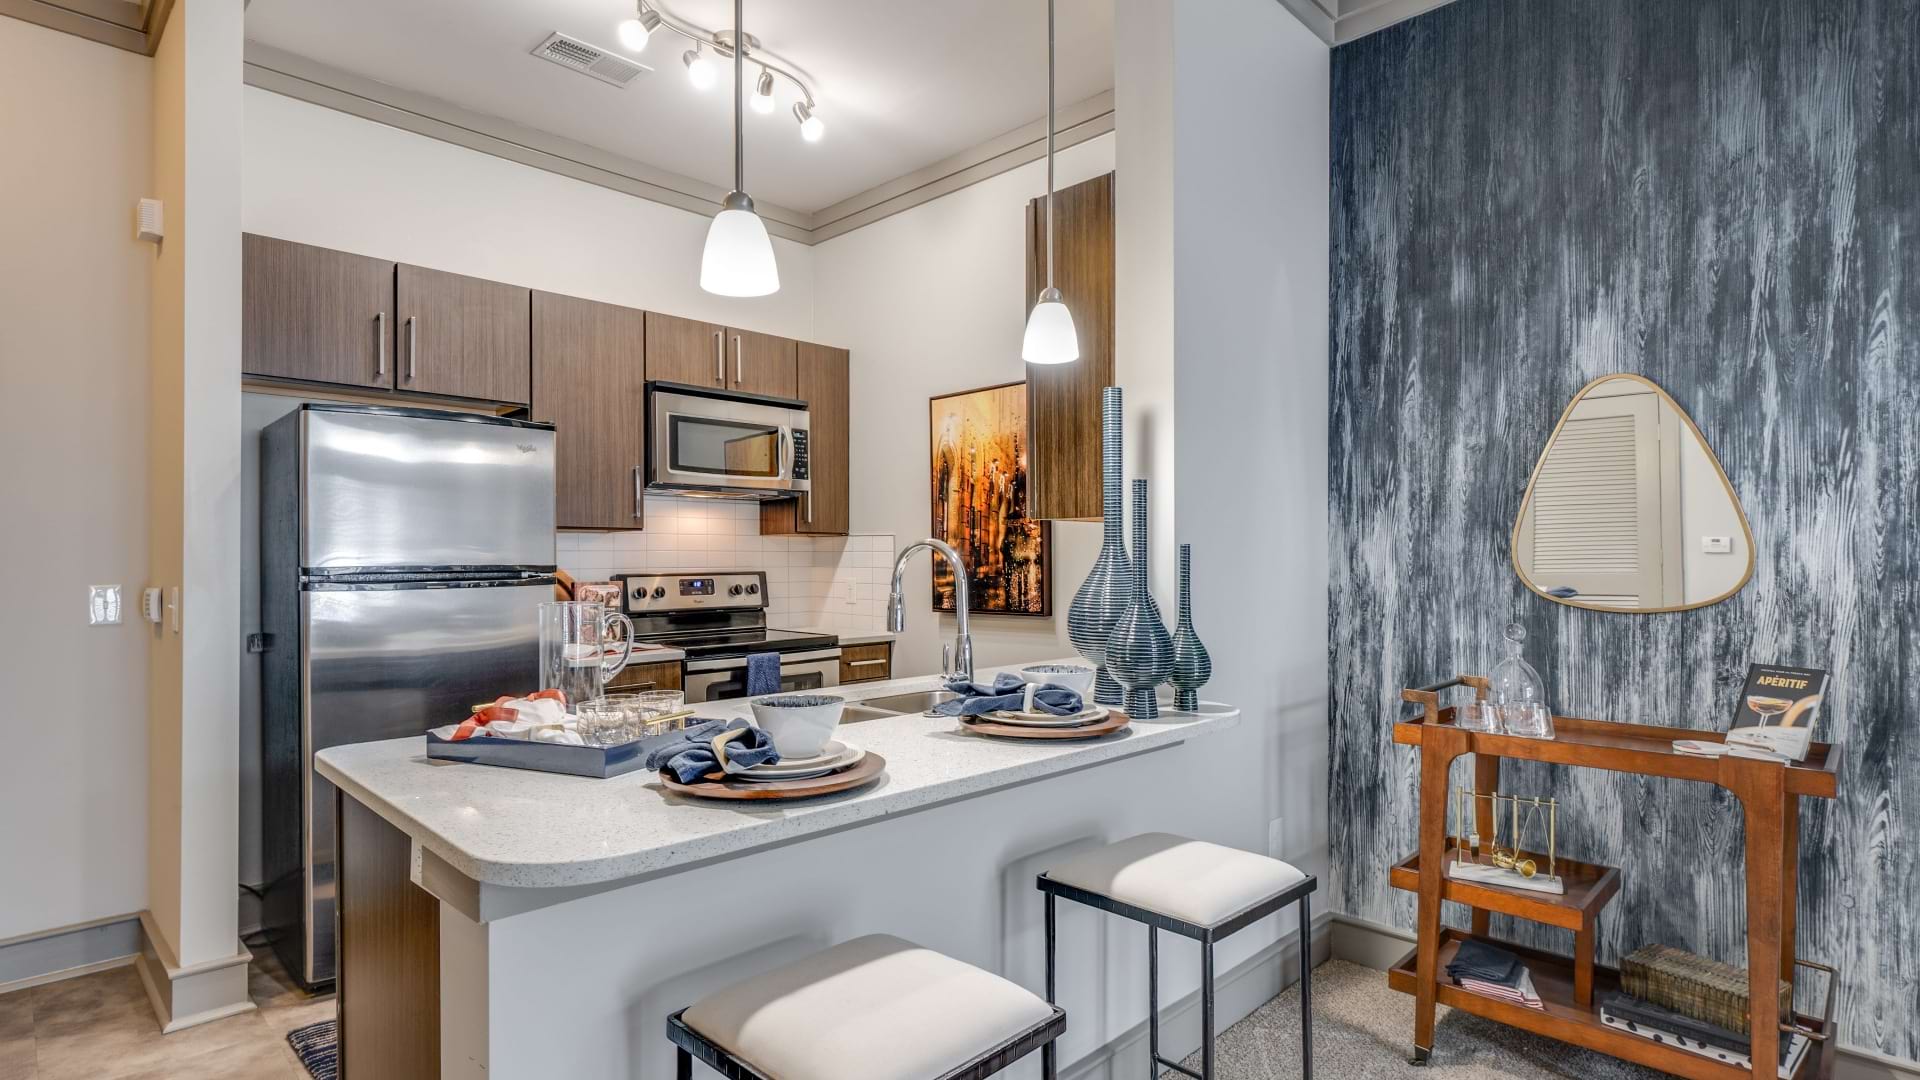 Spacious kitchen and blue accent wall at our modern apartments in Raleigh, NC